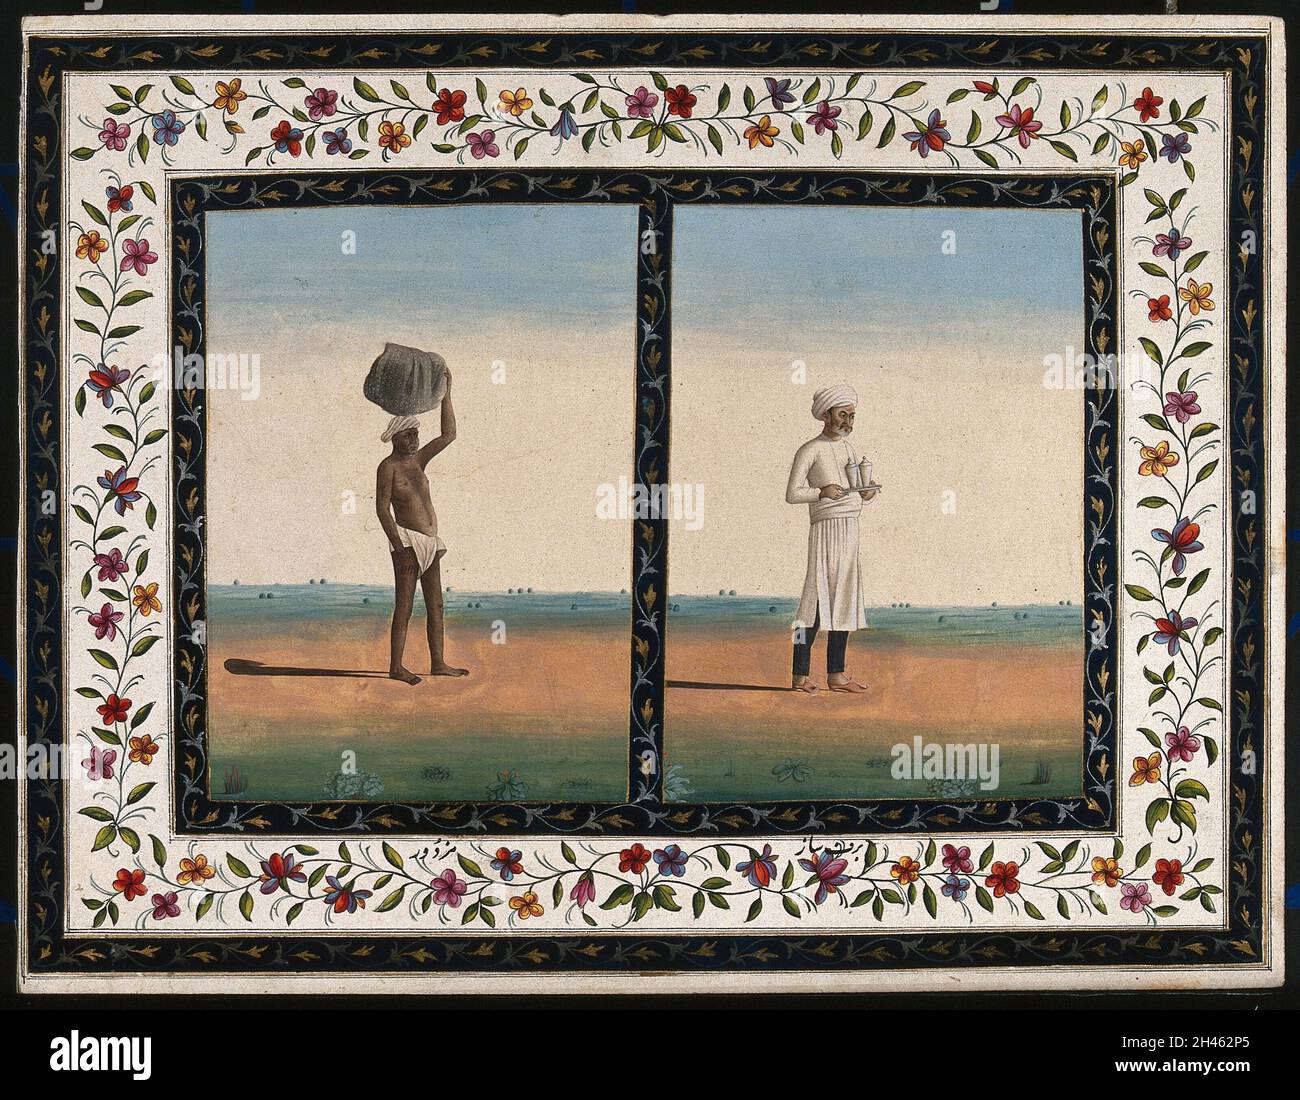 Left, a labourer carries a heavy load on his head; right, an attendant or bearer carries a tray. Gouache painting by an Indian artist. Stock Photo